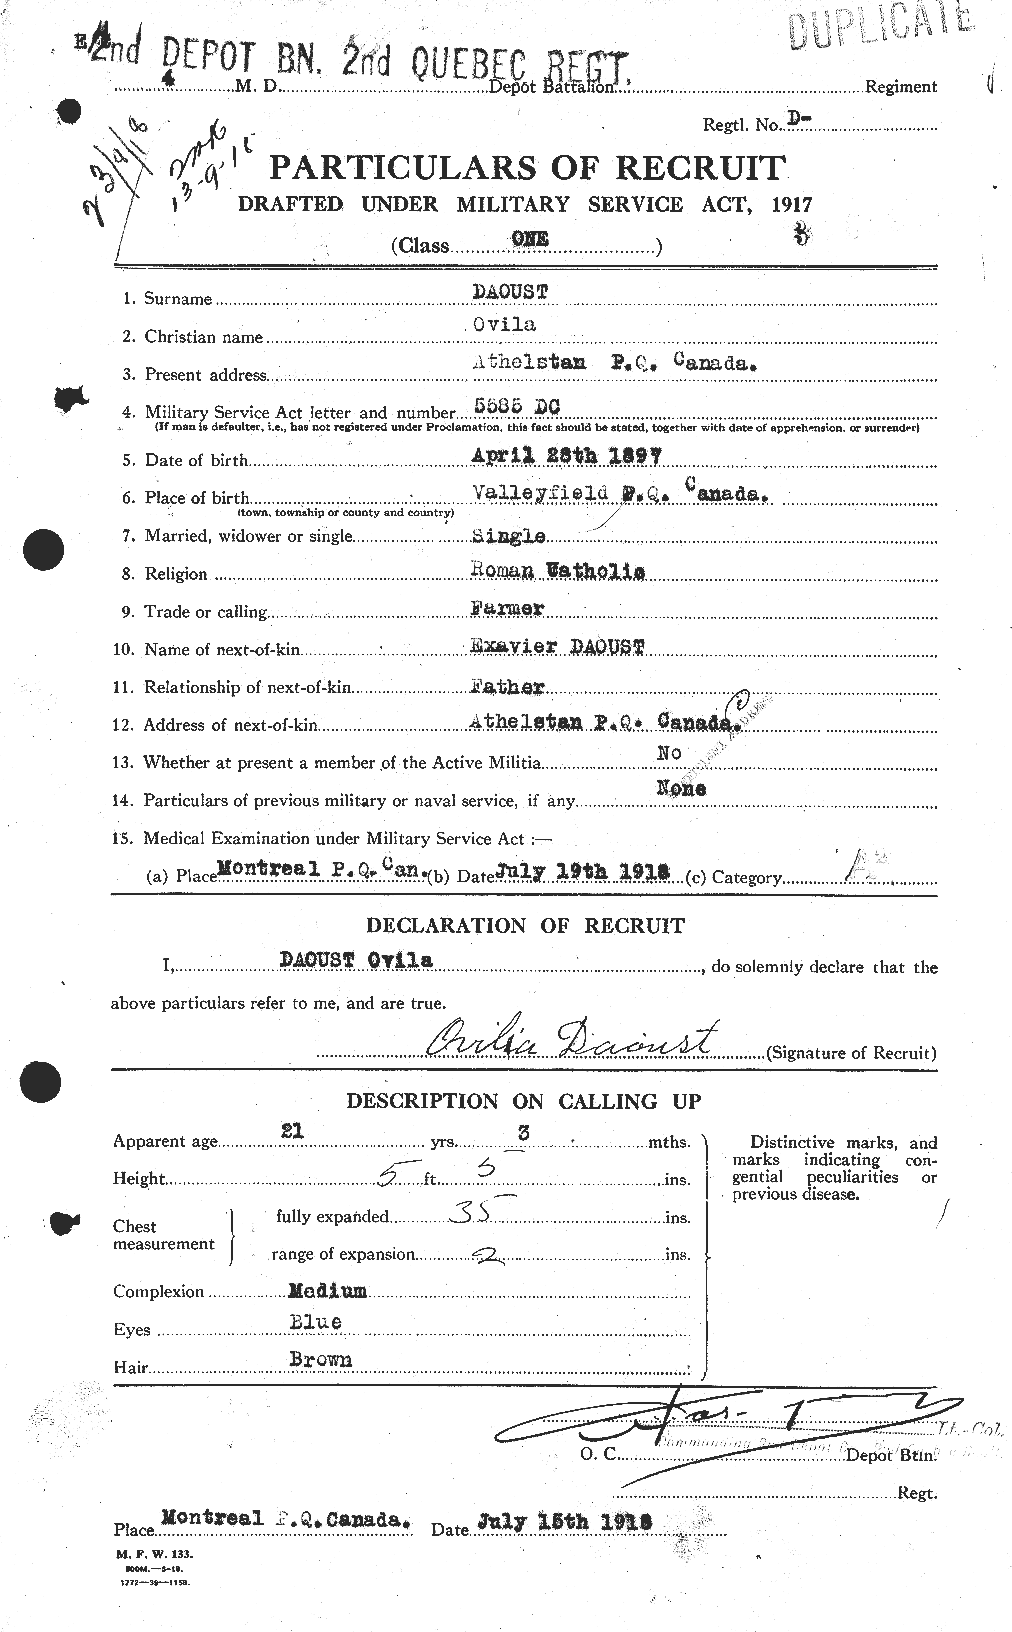 Personnel Records of the First World War - CEF 279948a